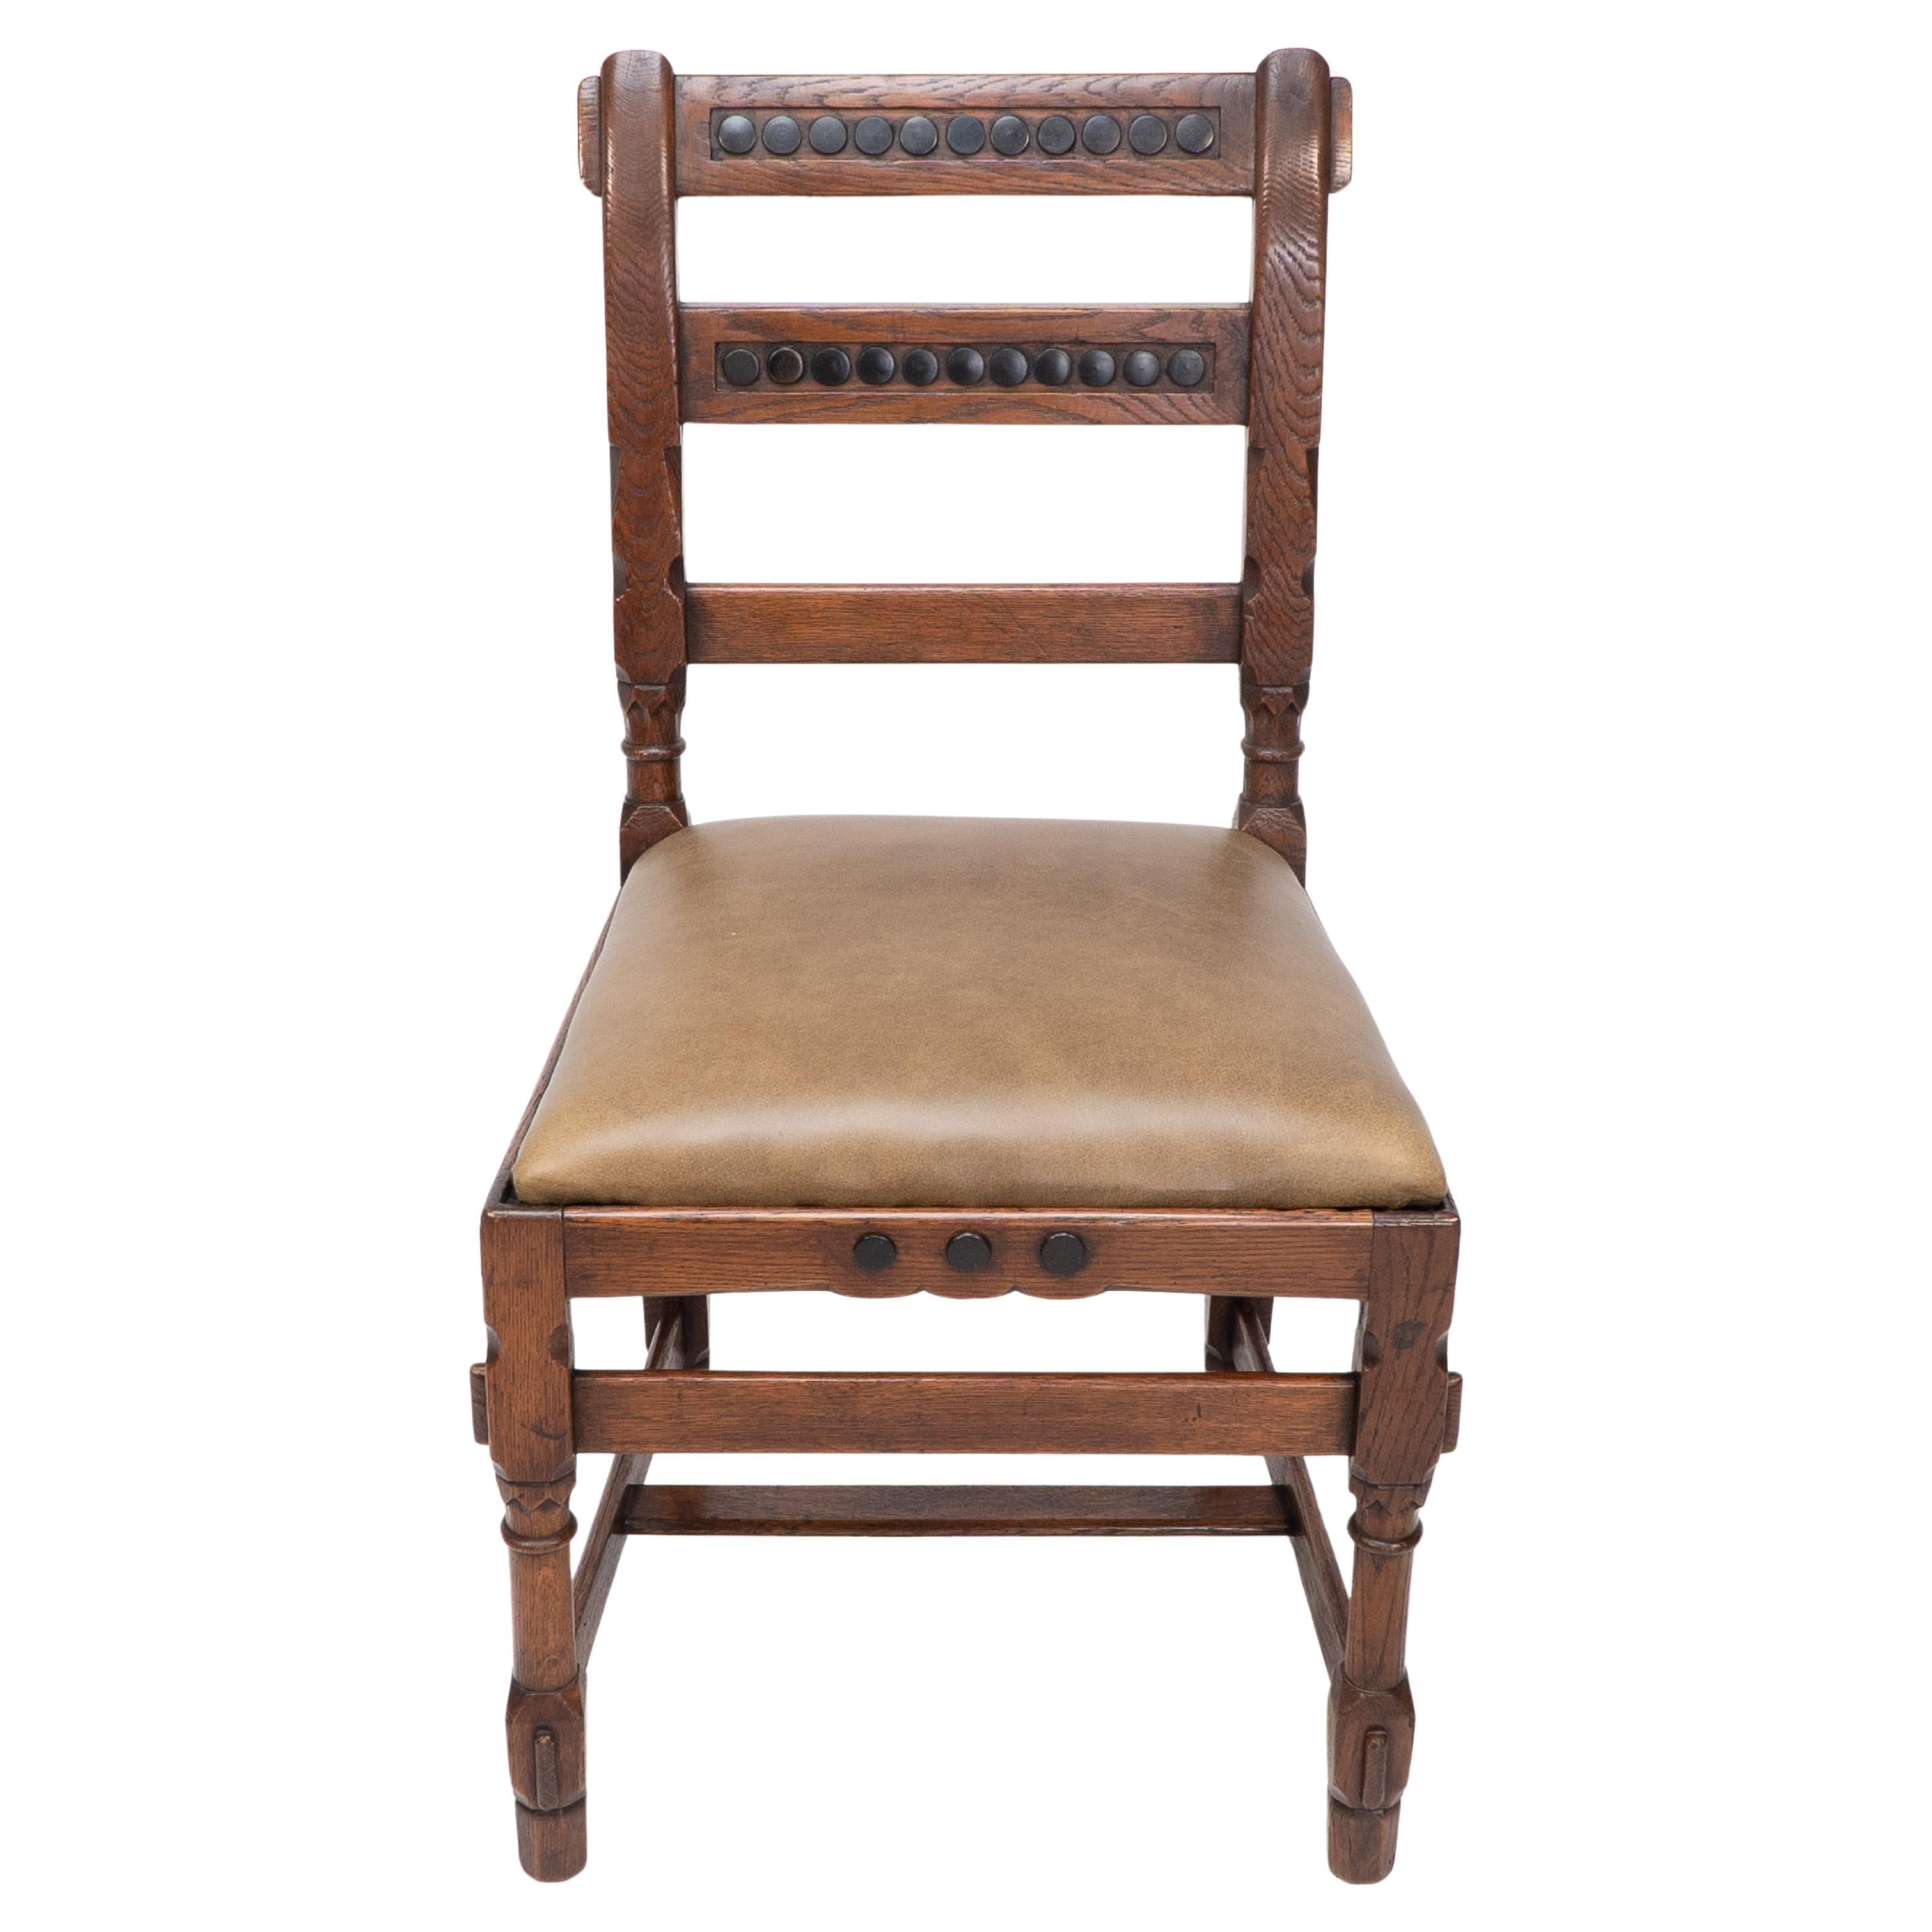 J P Seddon attributed. An Aesthetic Movement oak side chair with ebonized circles to the backrests and carved decoration with through exsposed tenonsn joints. Seat Height: 45 cm
